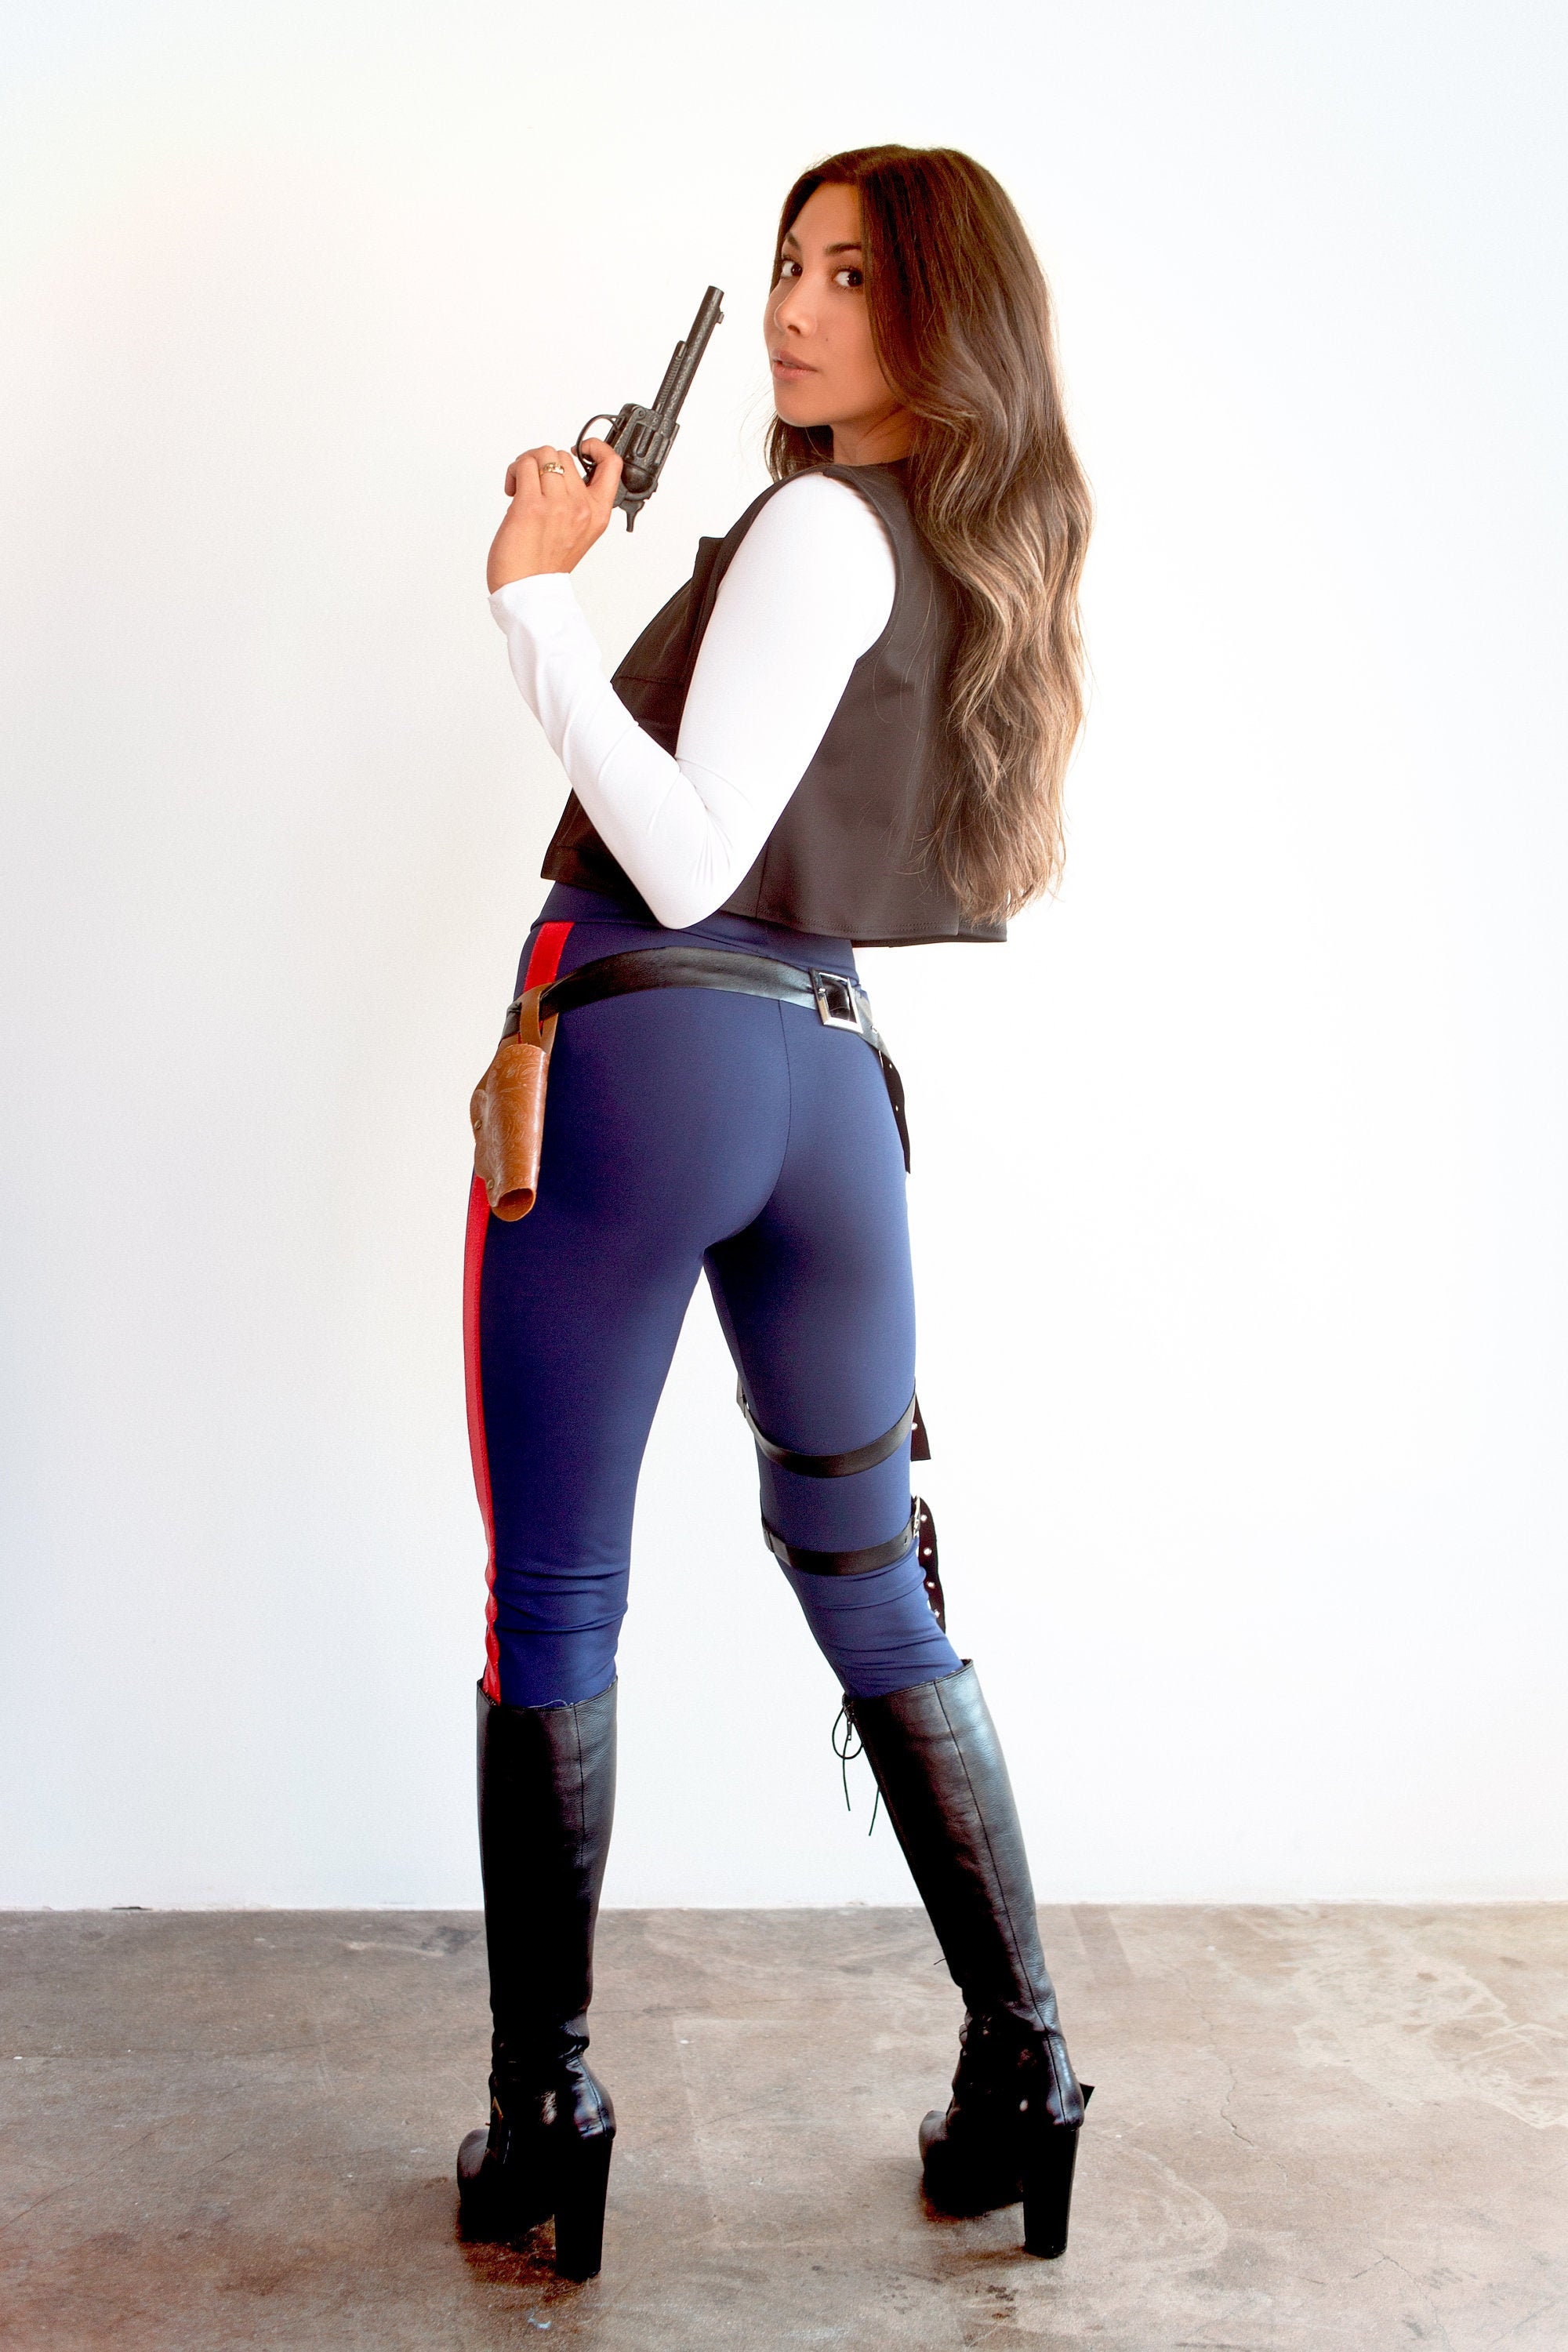 How To Wear Knee High Boots With Leggings? – solowomen